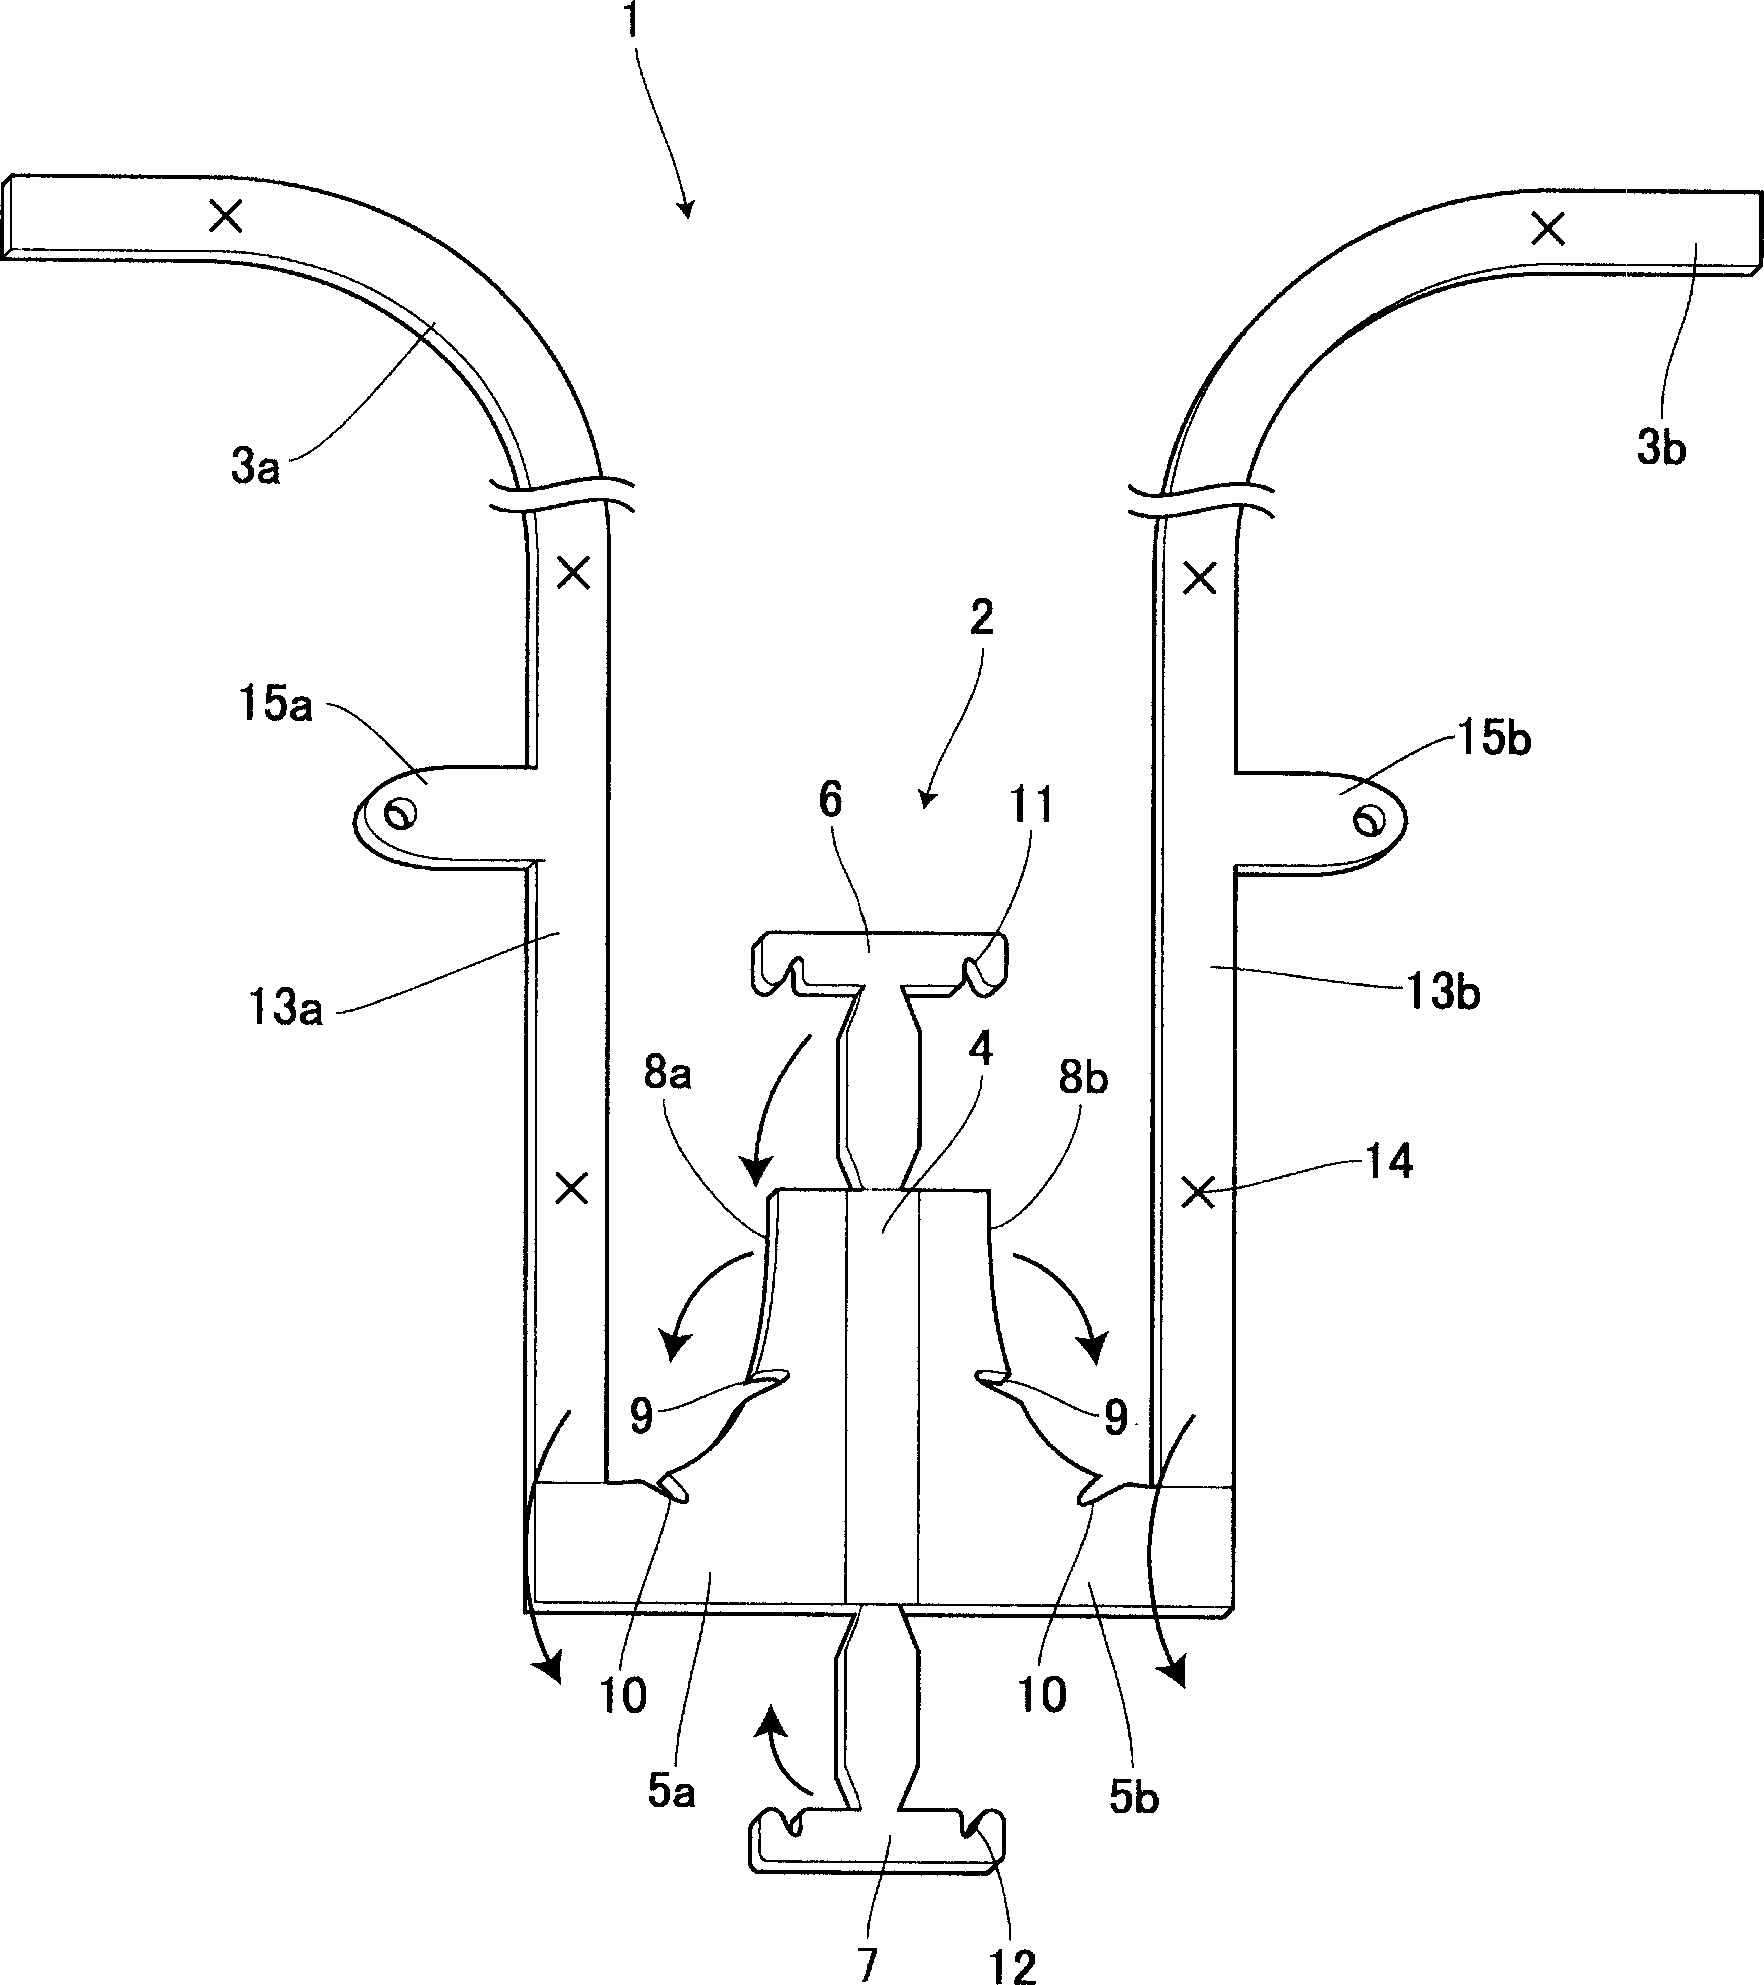 Positioning jig for vehicular-part mounting hole